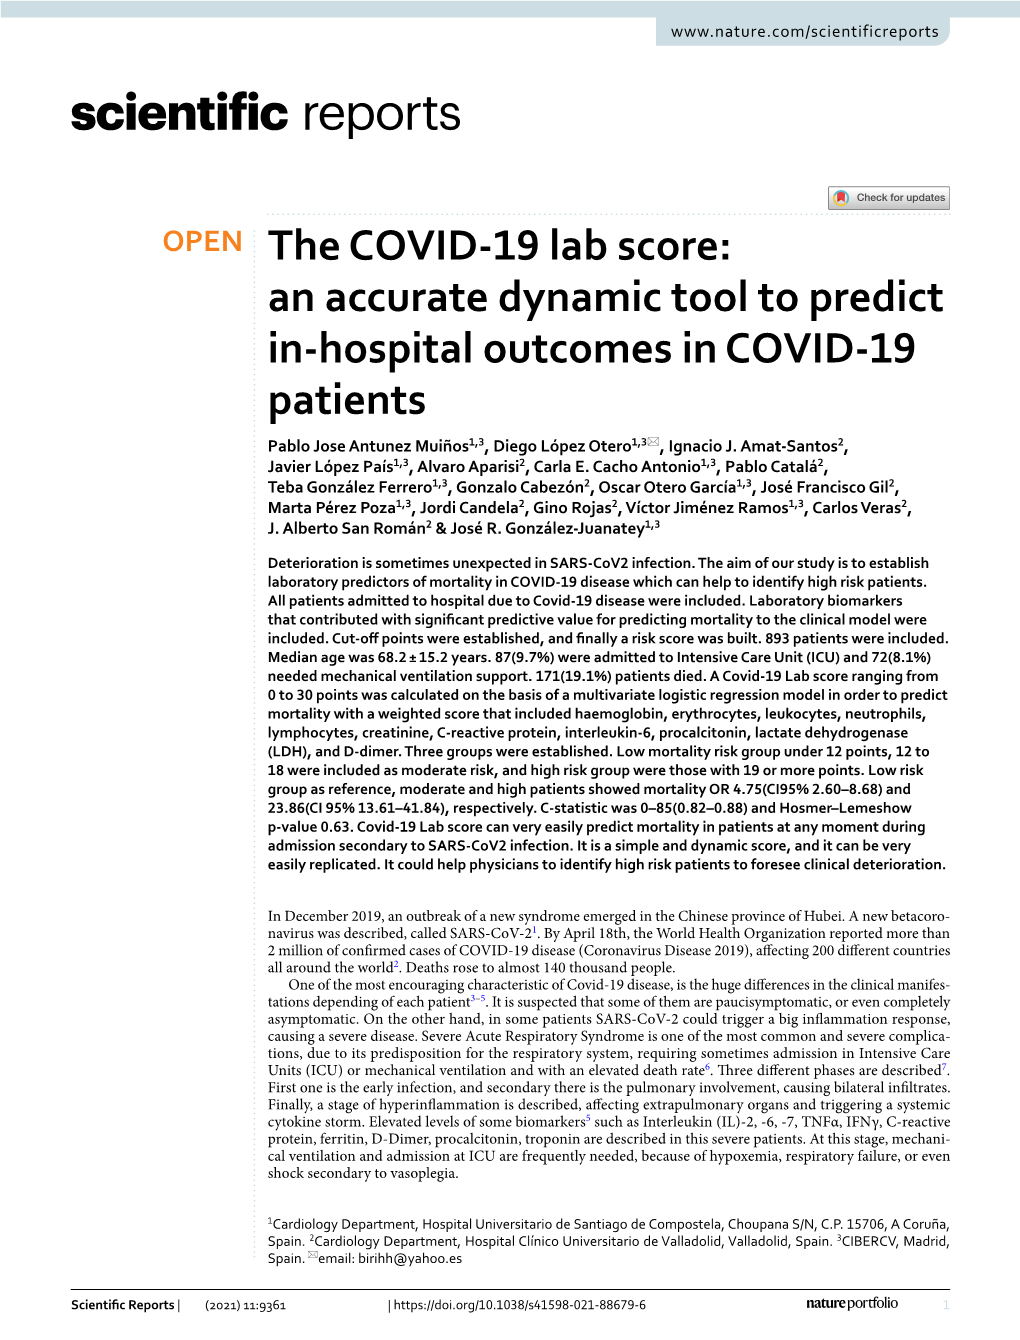 The COVID-19 Lab Score Is Performed, Ranging from 0 to 30 Points